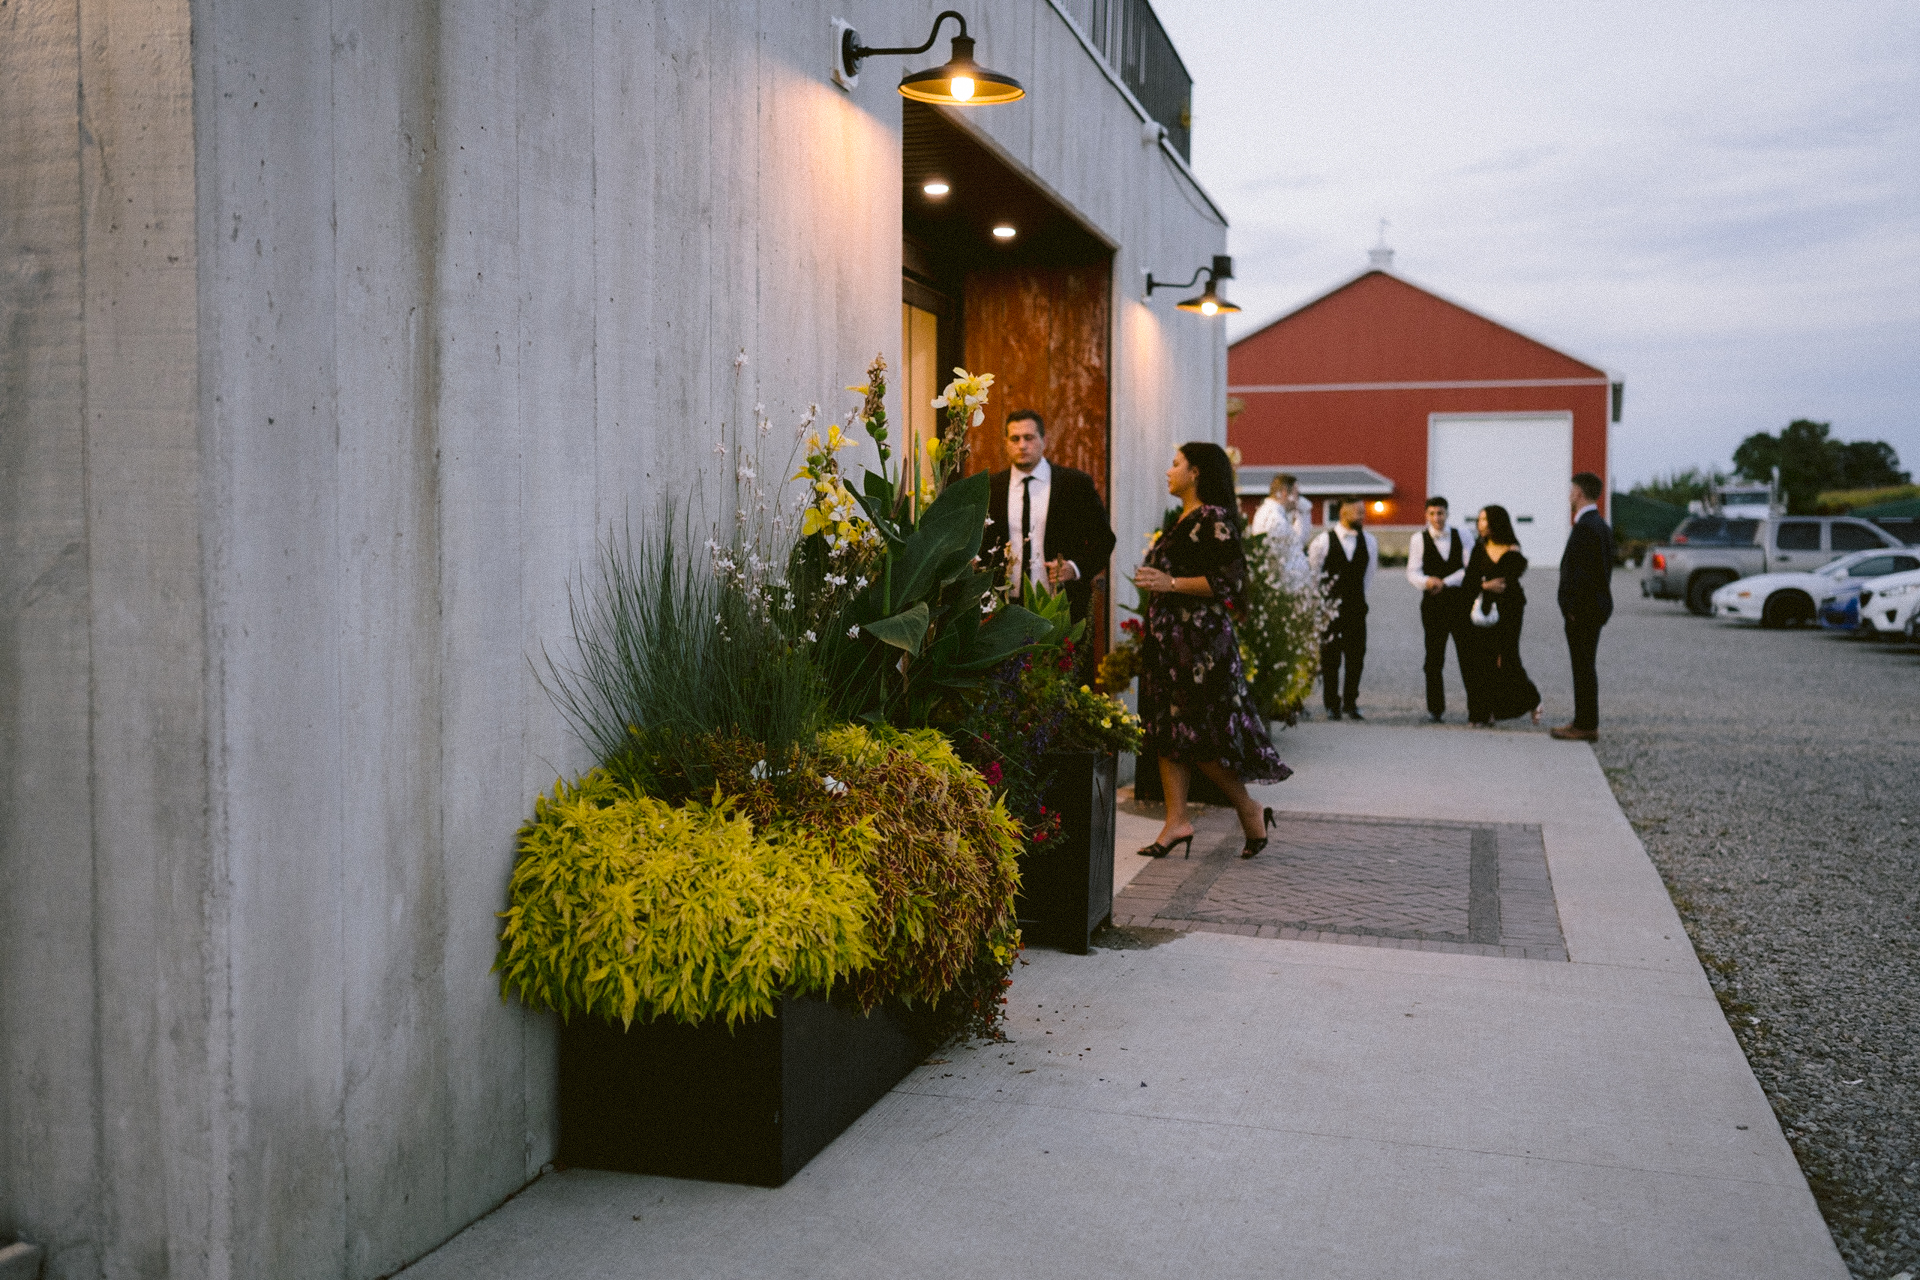 Guests mingle around at the spacious outdoor of The Byre at Cambium Farms.